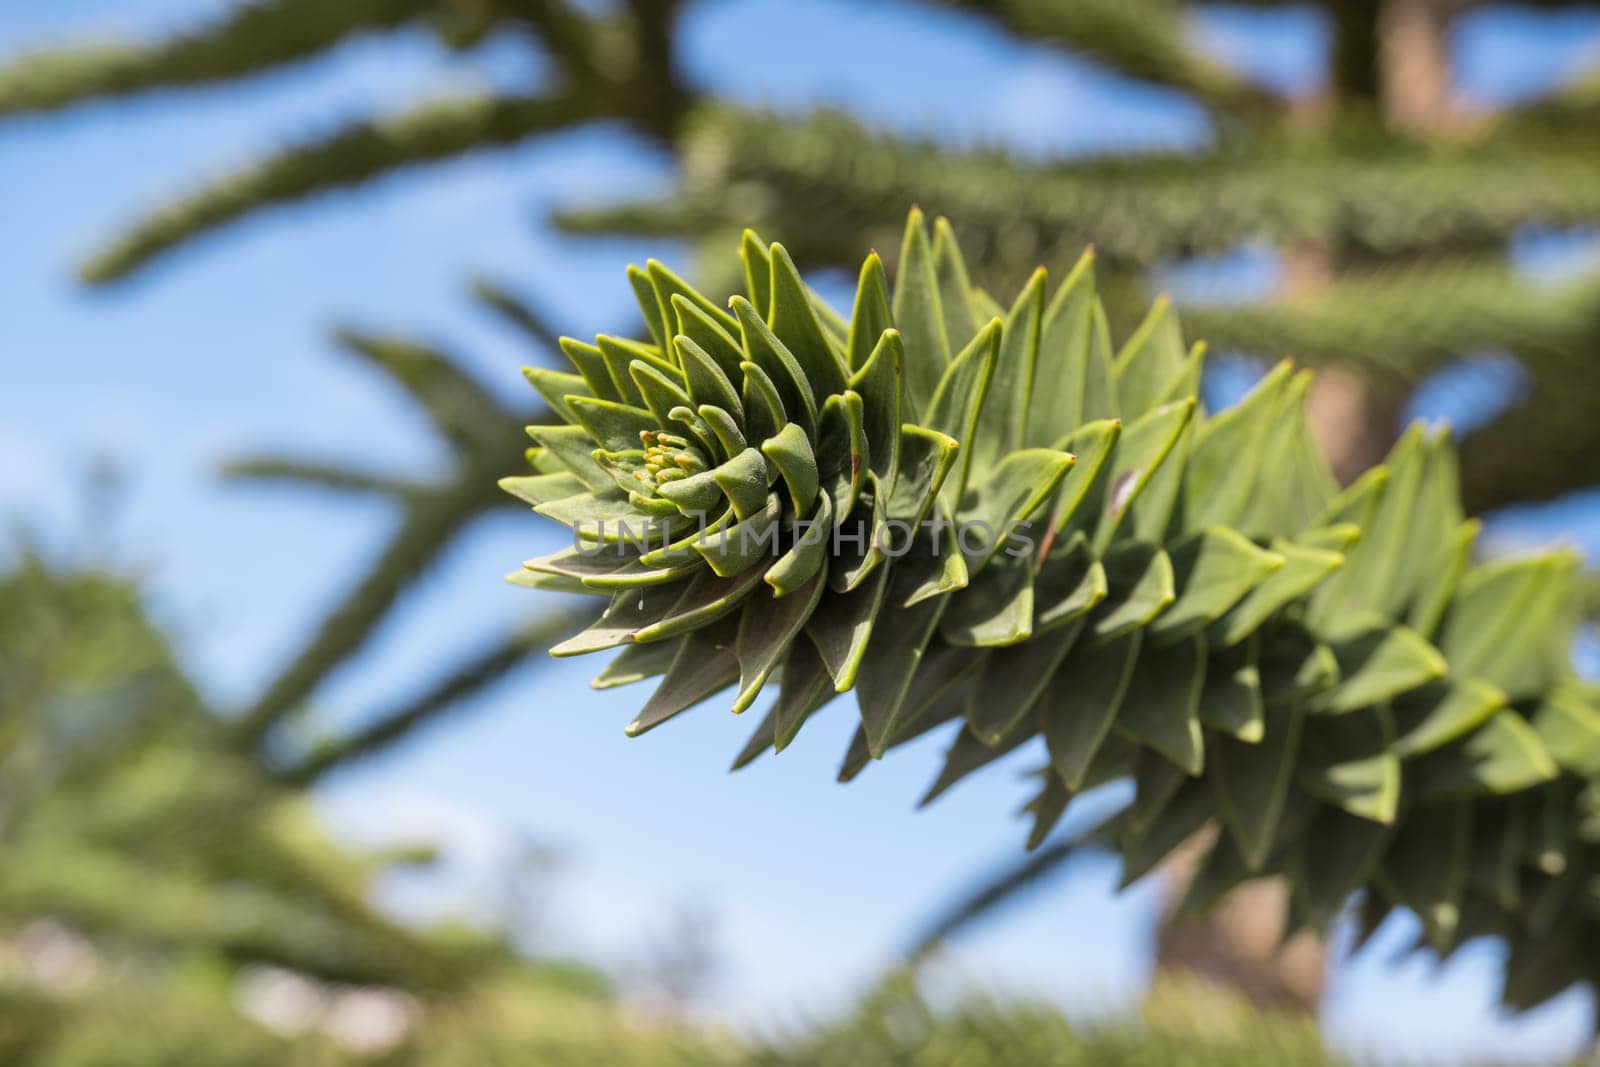 Close-up of a thorny green branch of Araucaria araucana, monkey puzzle tree, monkey tail tree or Chilean pine in Krasnodar landscape city park or Galitsky park